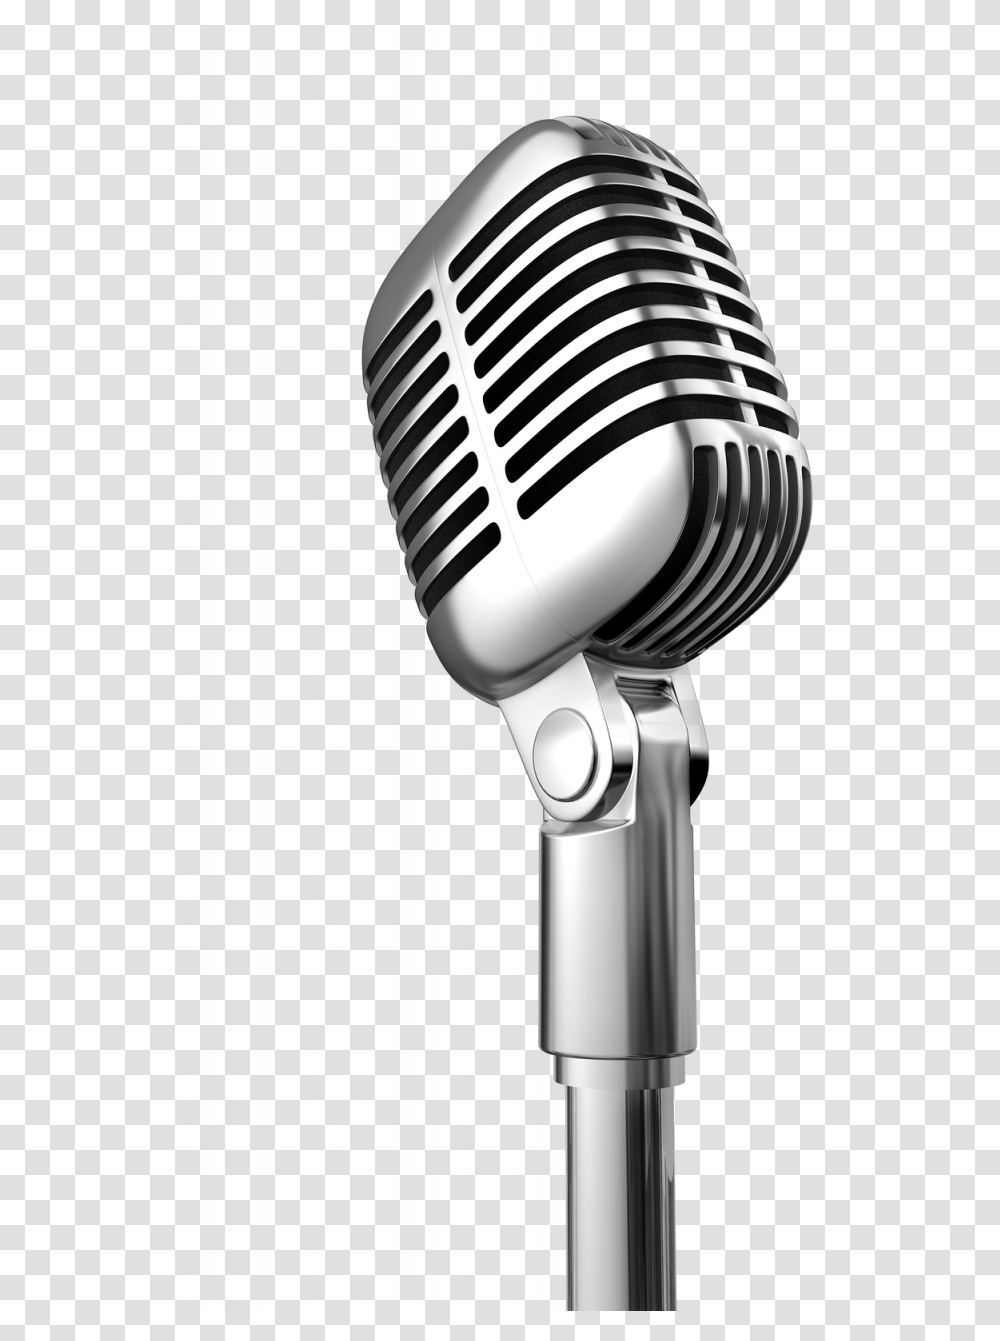 Download Hd Open Mic Backgrounds Old Microphone Background Mic, Electrical Device, Blow Dryer, Appliance, Hair Drier Transparent Png